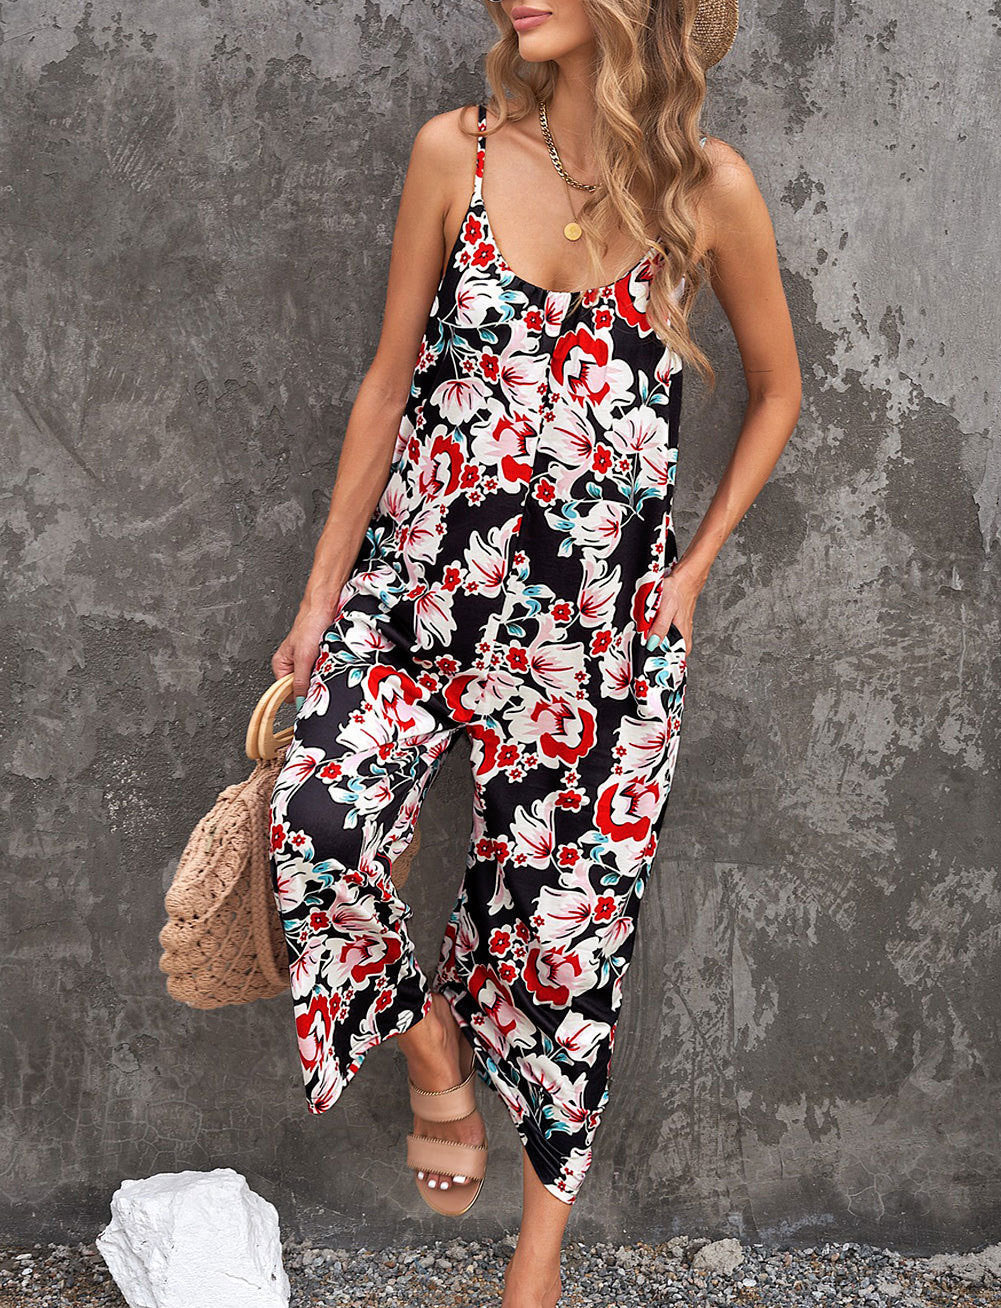 Jumpsuit Flowers Print Suspender With Pockets Fashion Round-neck Overalls For Women - Carvan Mart